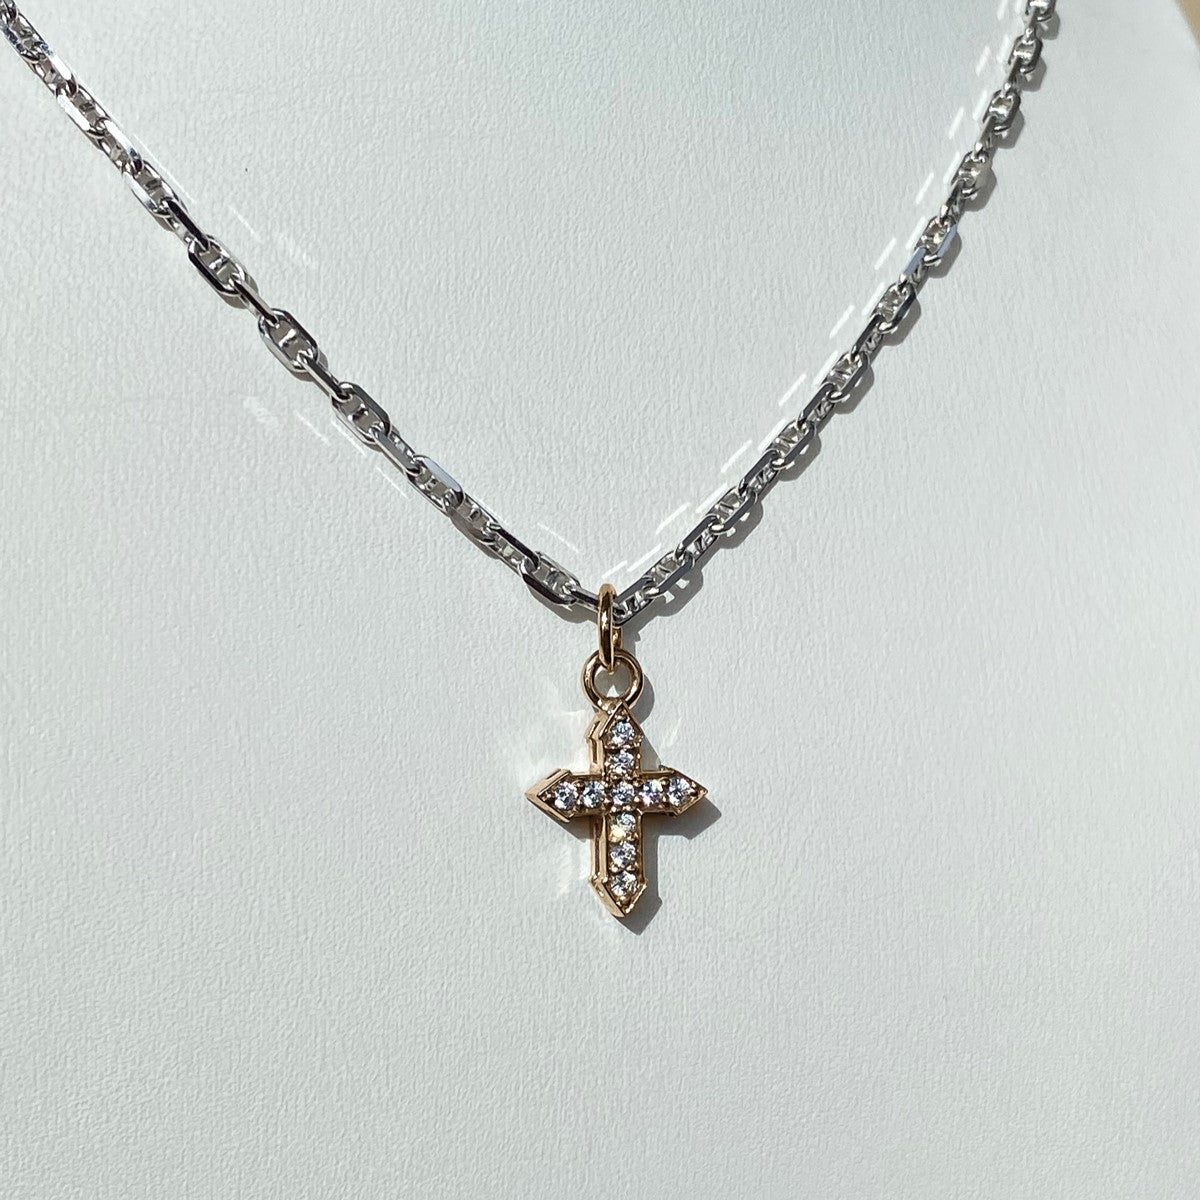 PENDANT CROSS "GLOW" WITH WHITE DIAMONDS ON A SILVER CHAIN / SOLID GOLD